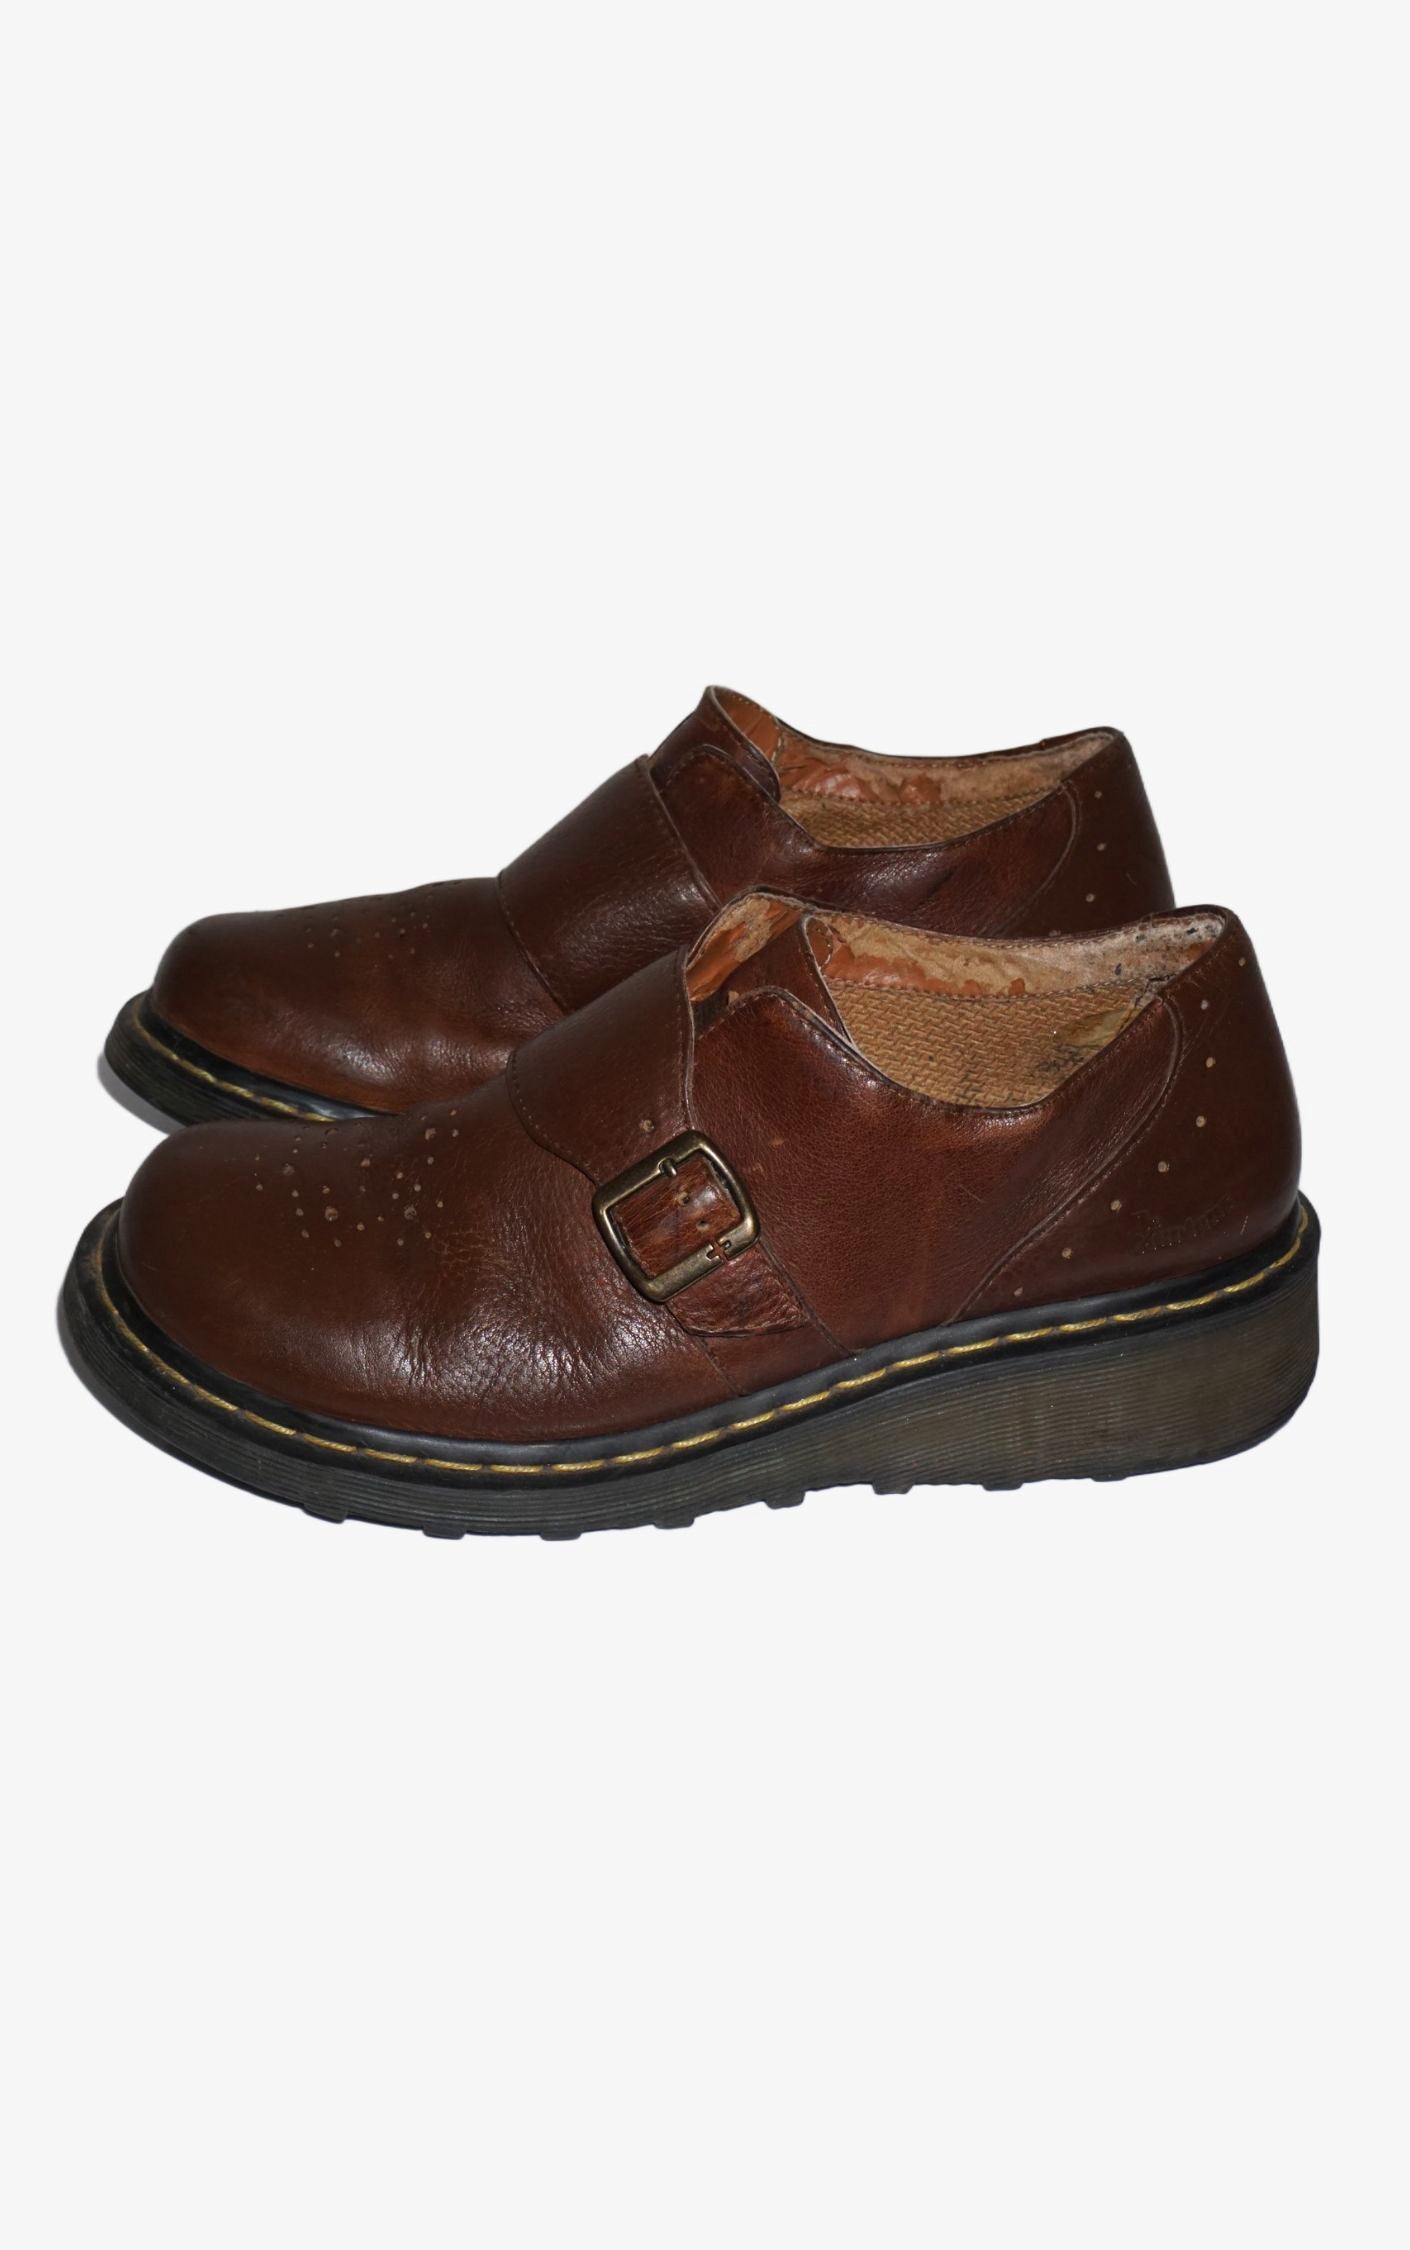 DR.MARTENS Vintage Monk Strap Buckle Chunky Boots resellum